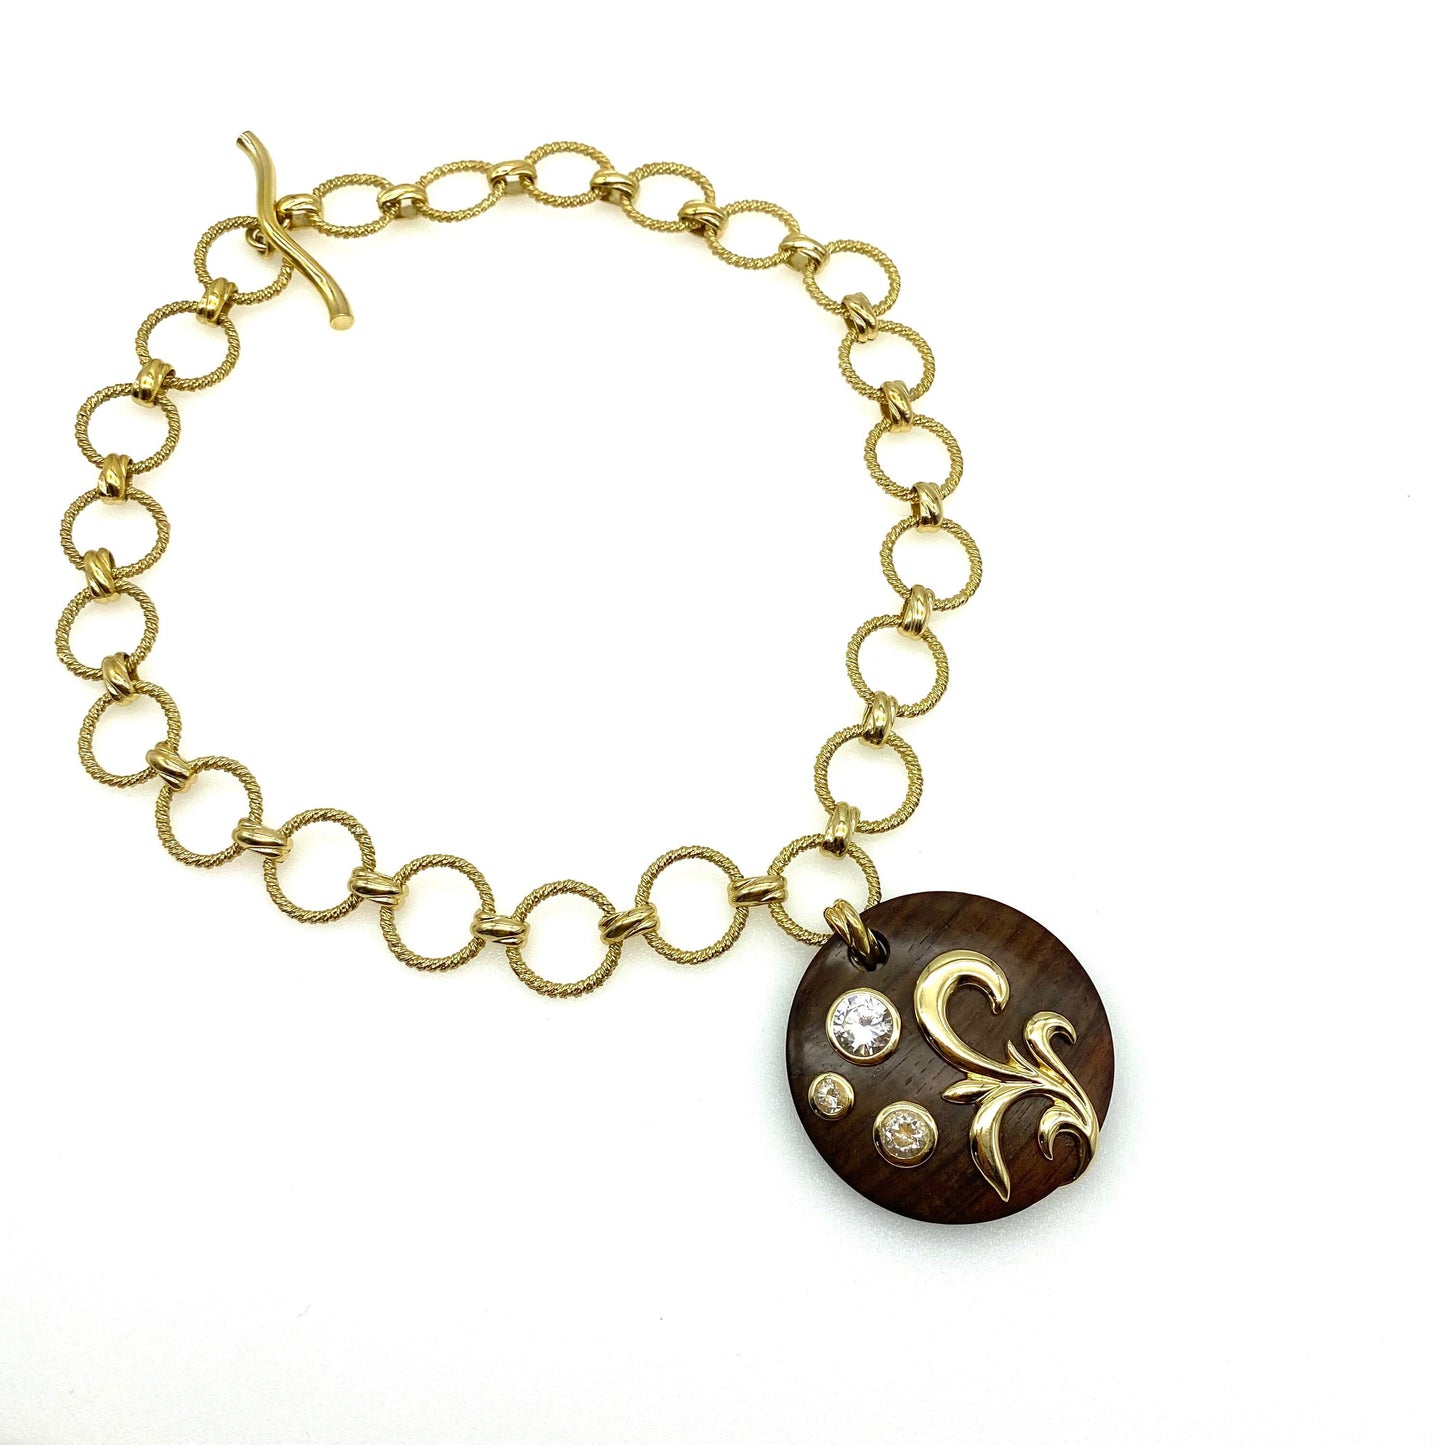 Dominique Aurientis Gold Plated Necklace with Round Wood Pendant